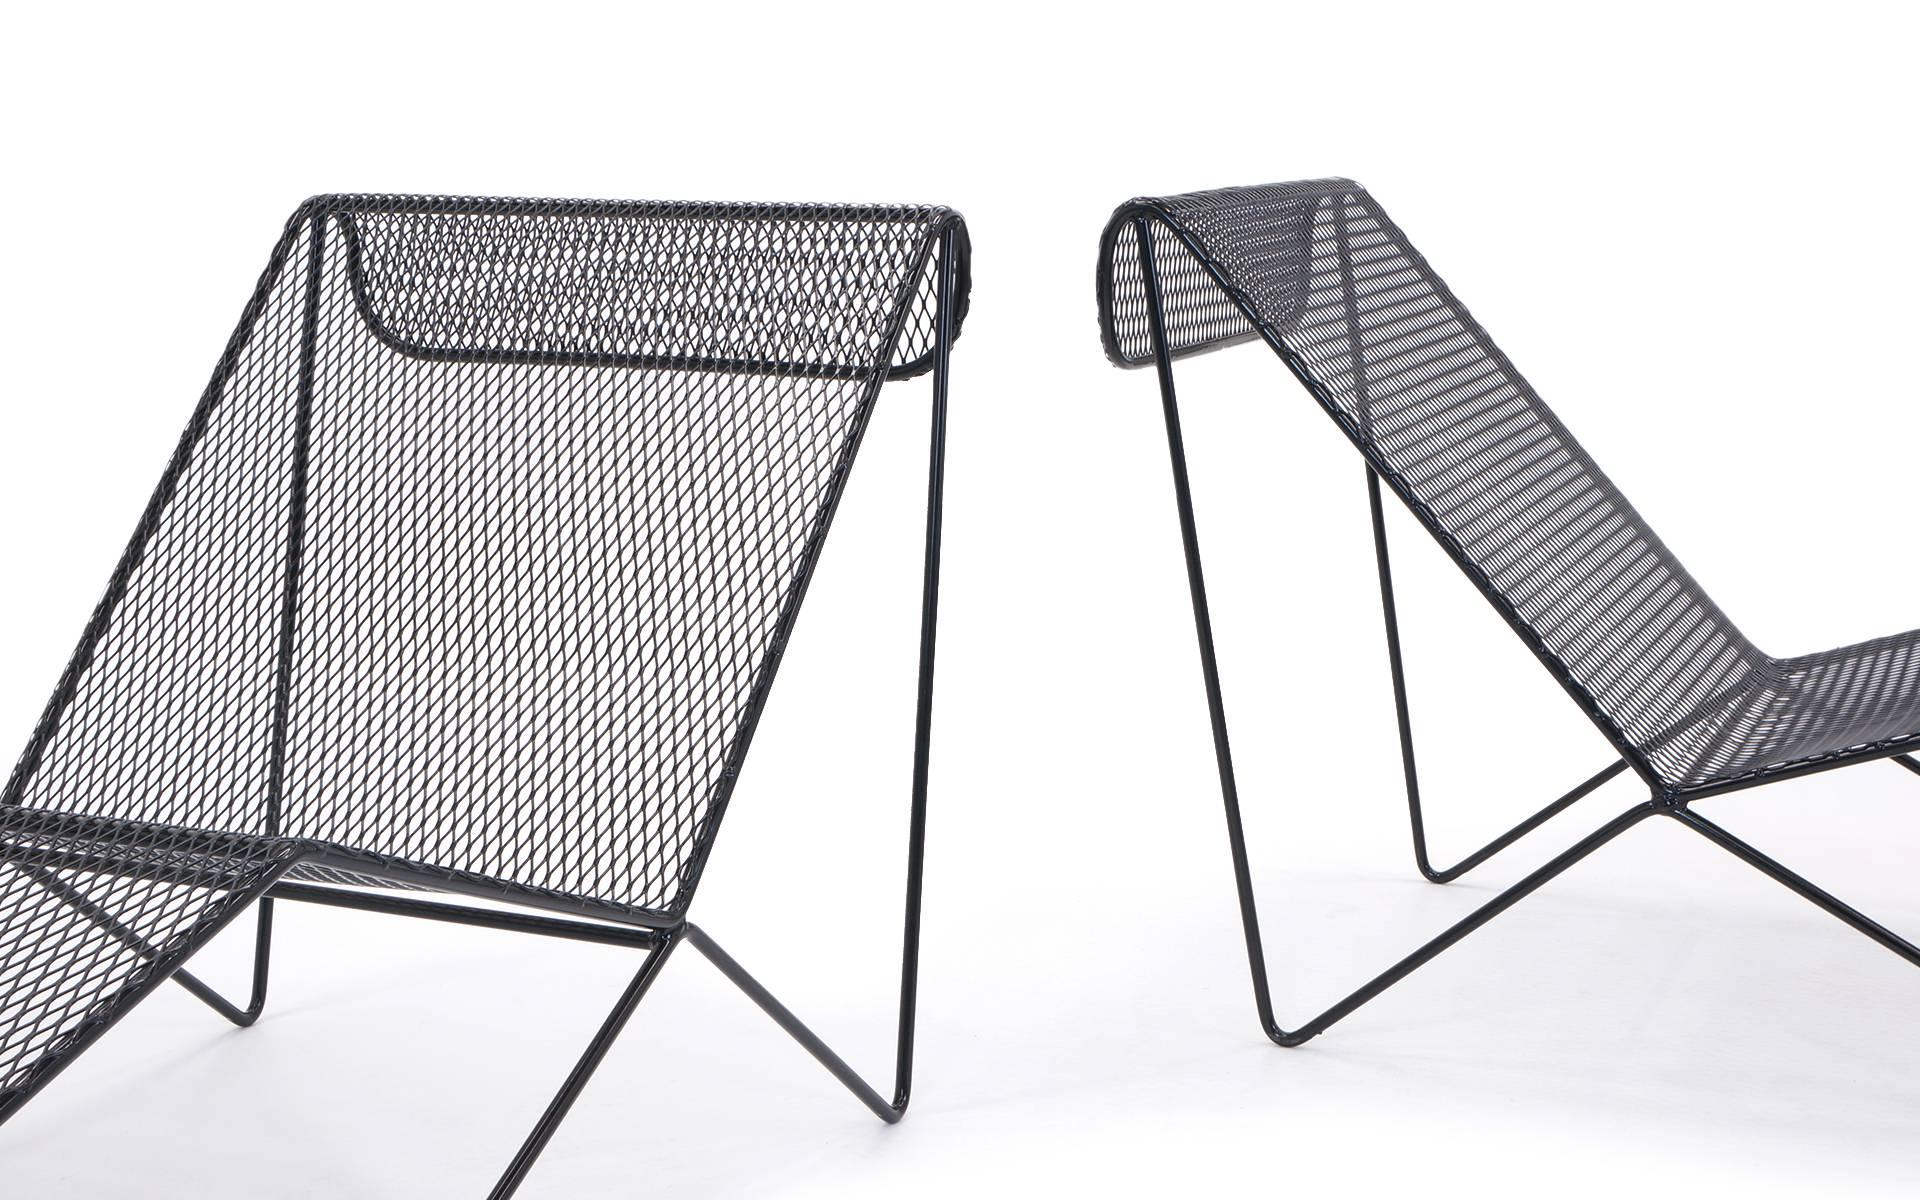 Powder-Coated Pair of Outdoor Chaise Lounge Chairs Attributed to Milo Baughman